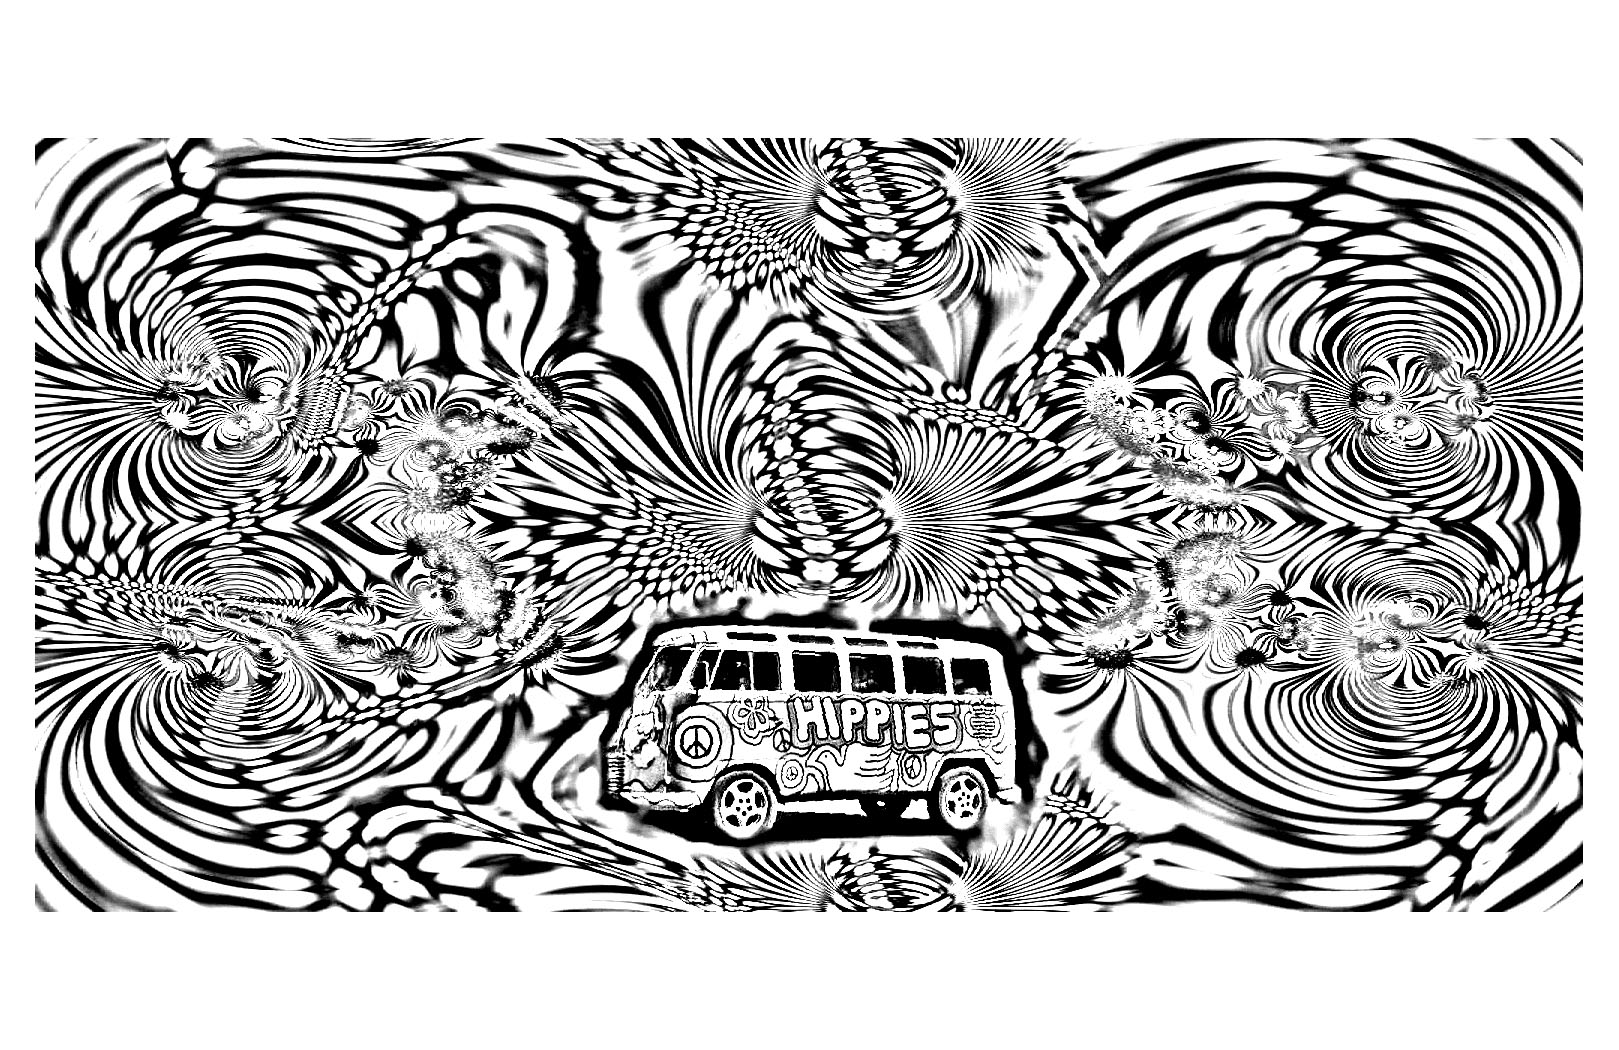 Psychedelic bus - Psychedelic Adult Coloring Pages